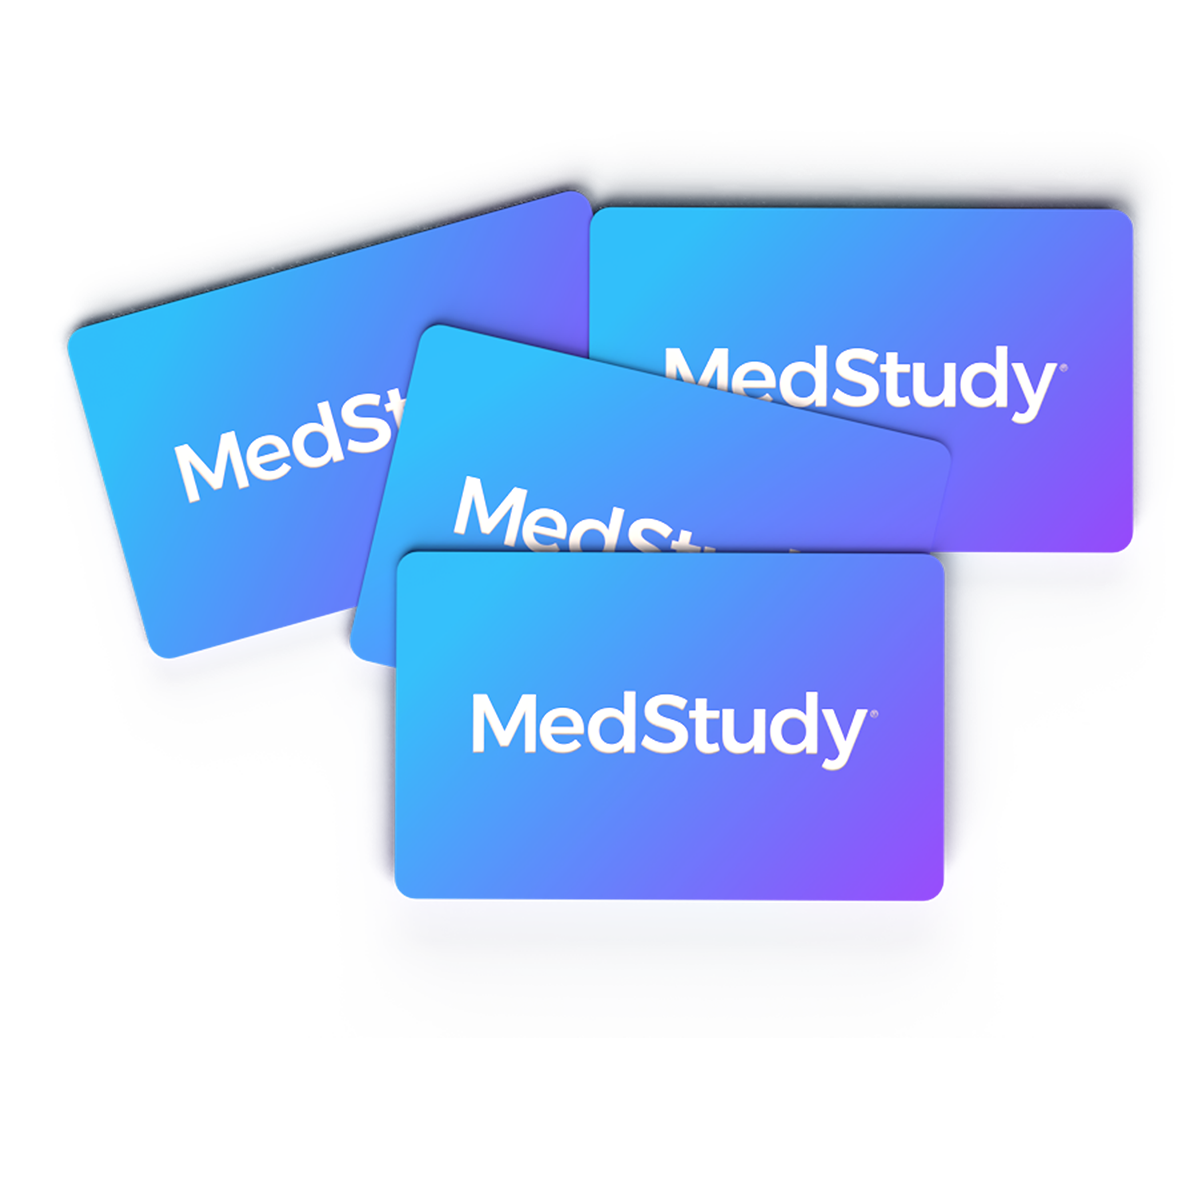 Four MedStudy gift cards stacked on top of each other. Gift cards are a blue variant with a white centered MedStudy logo